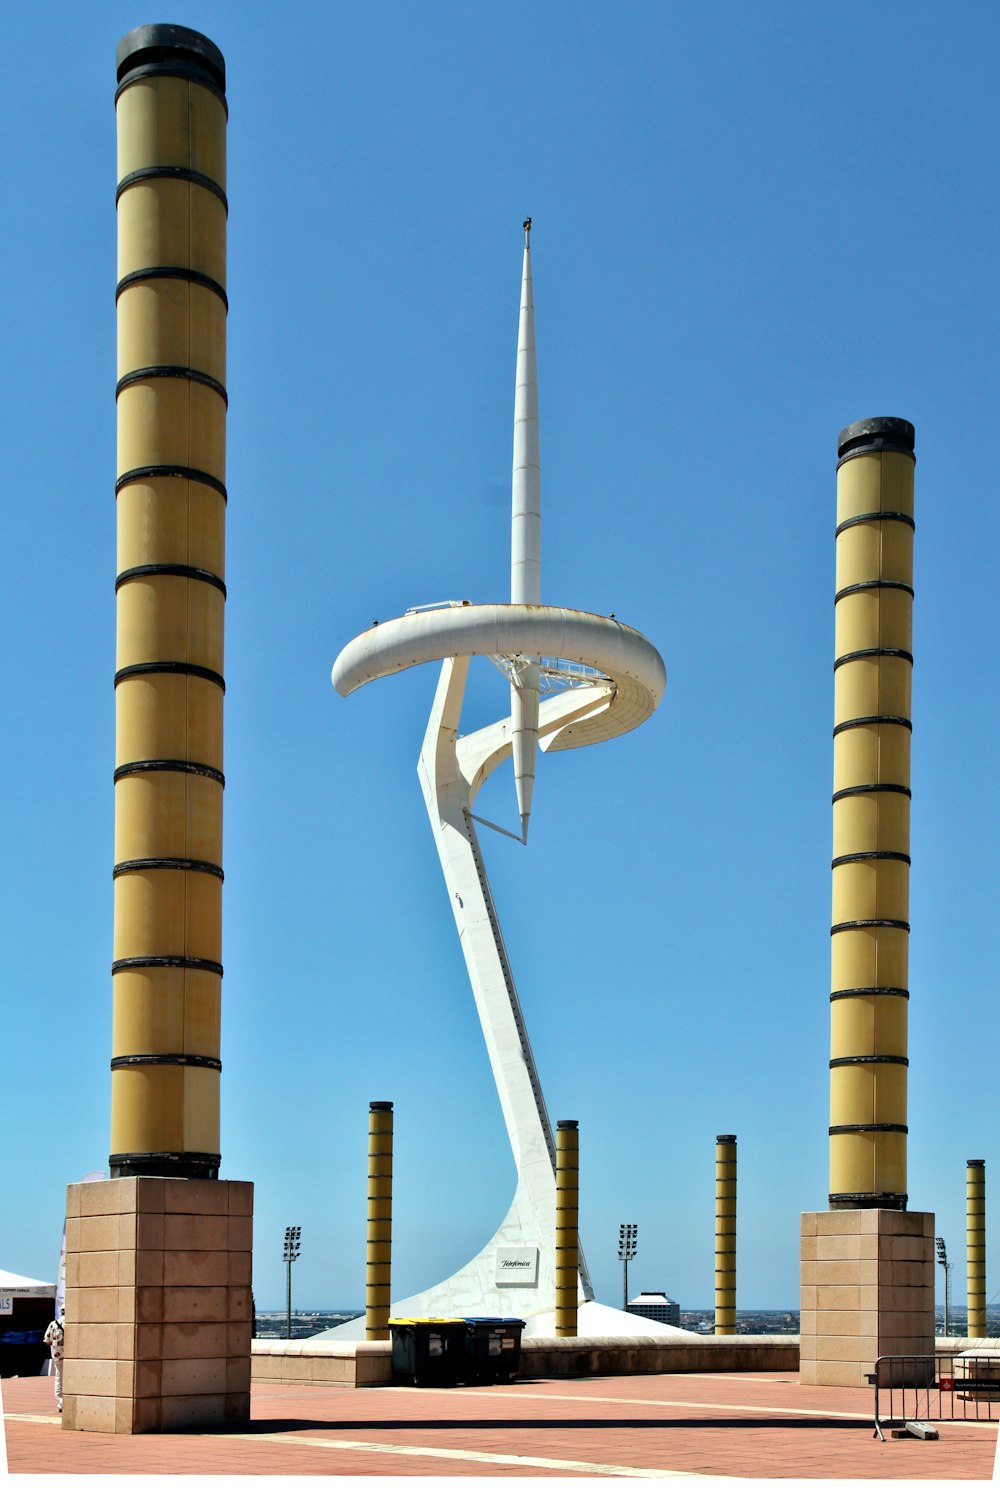 a tall white sculpture sitting next to two tall yellow pillars